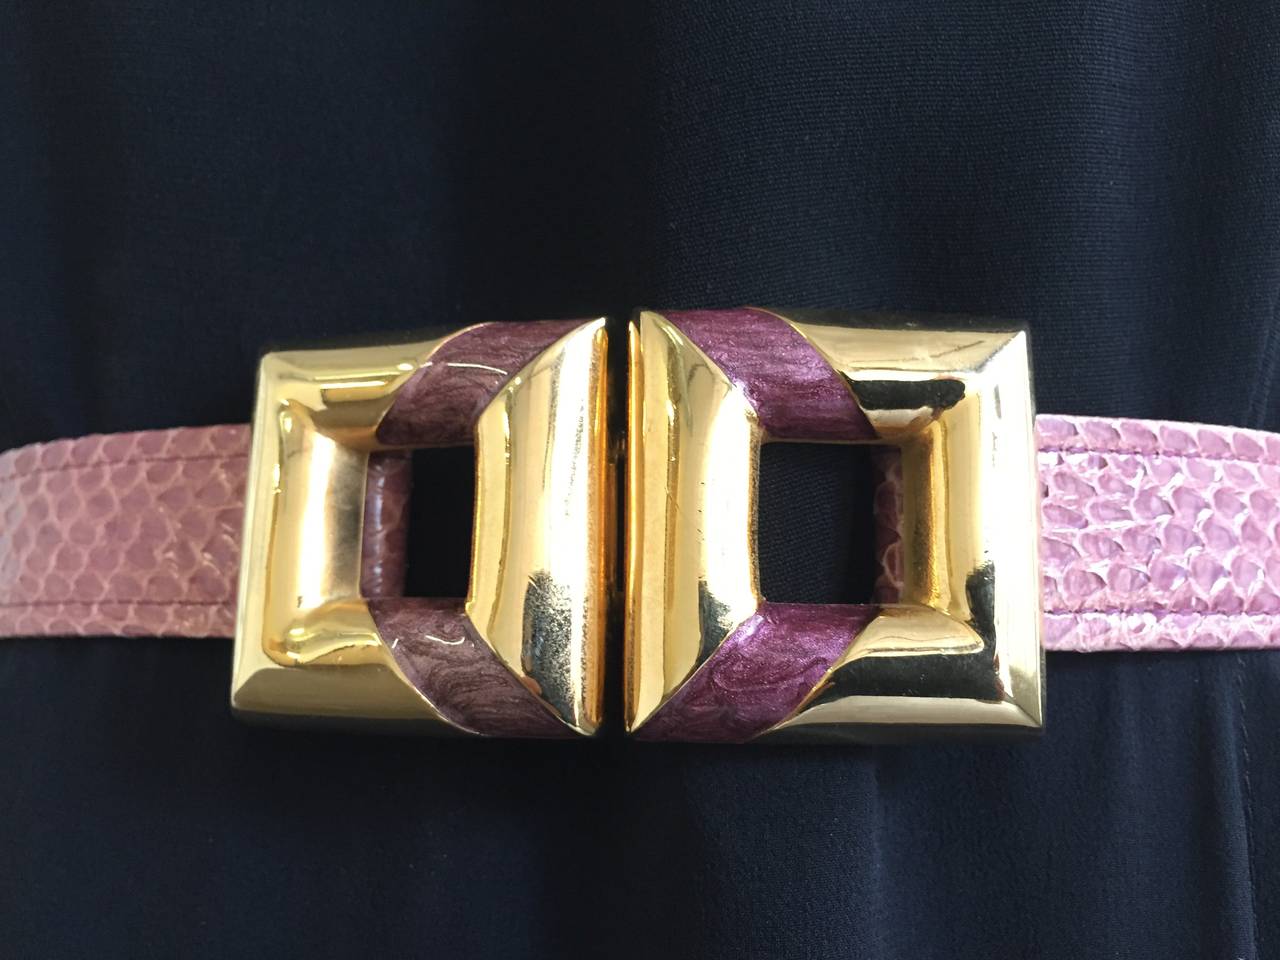 Alexis Kirk 1980s mauve snake skin strap with square brass buckle adjustable belt. There are two sliders on each side that adjust to size. There is an extra black snake skin belt that comes with this so you can easily change out for different look.